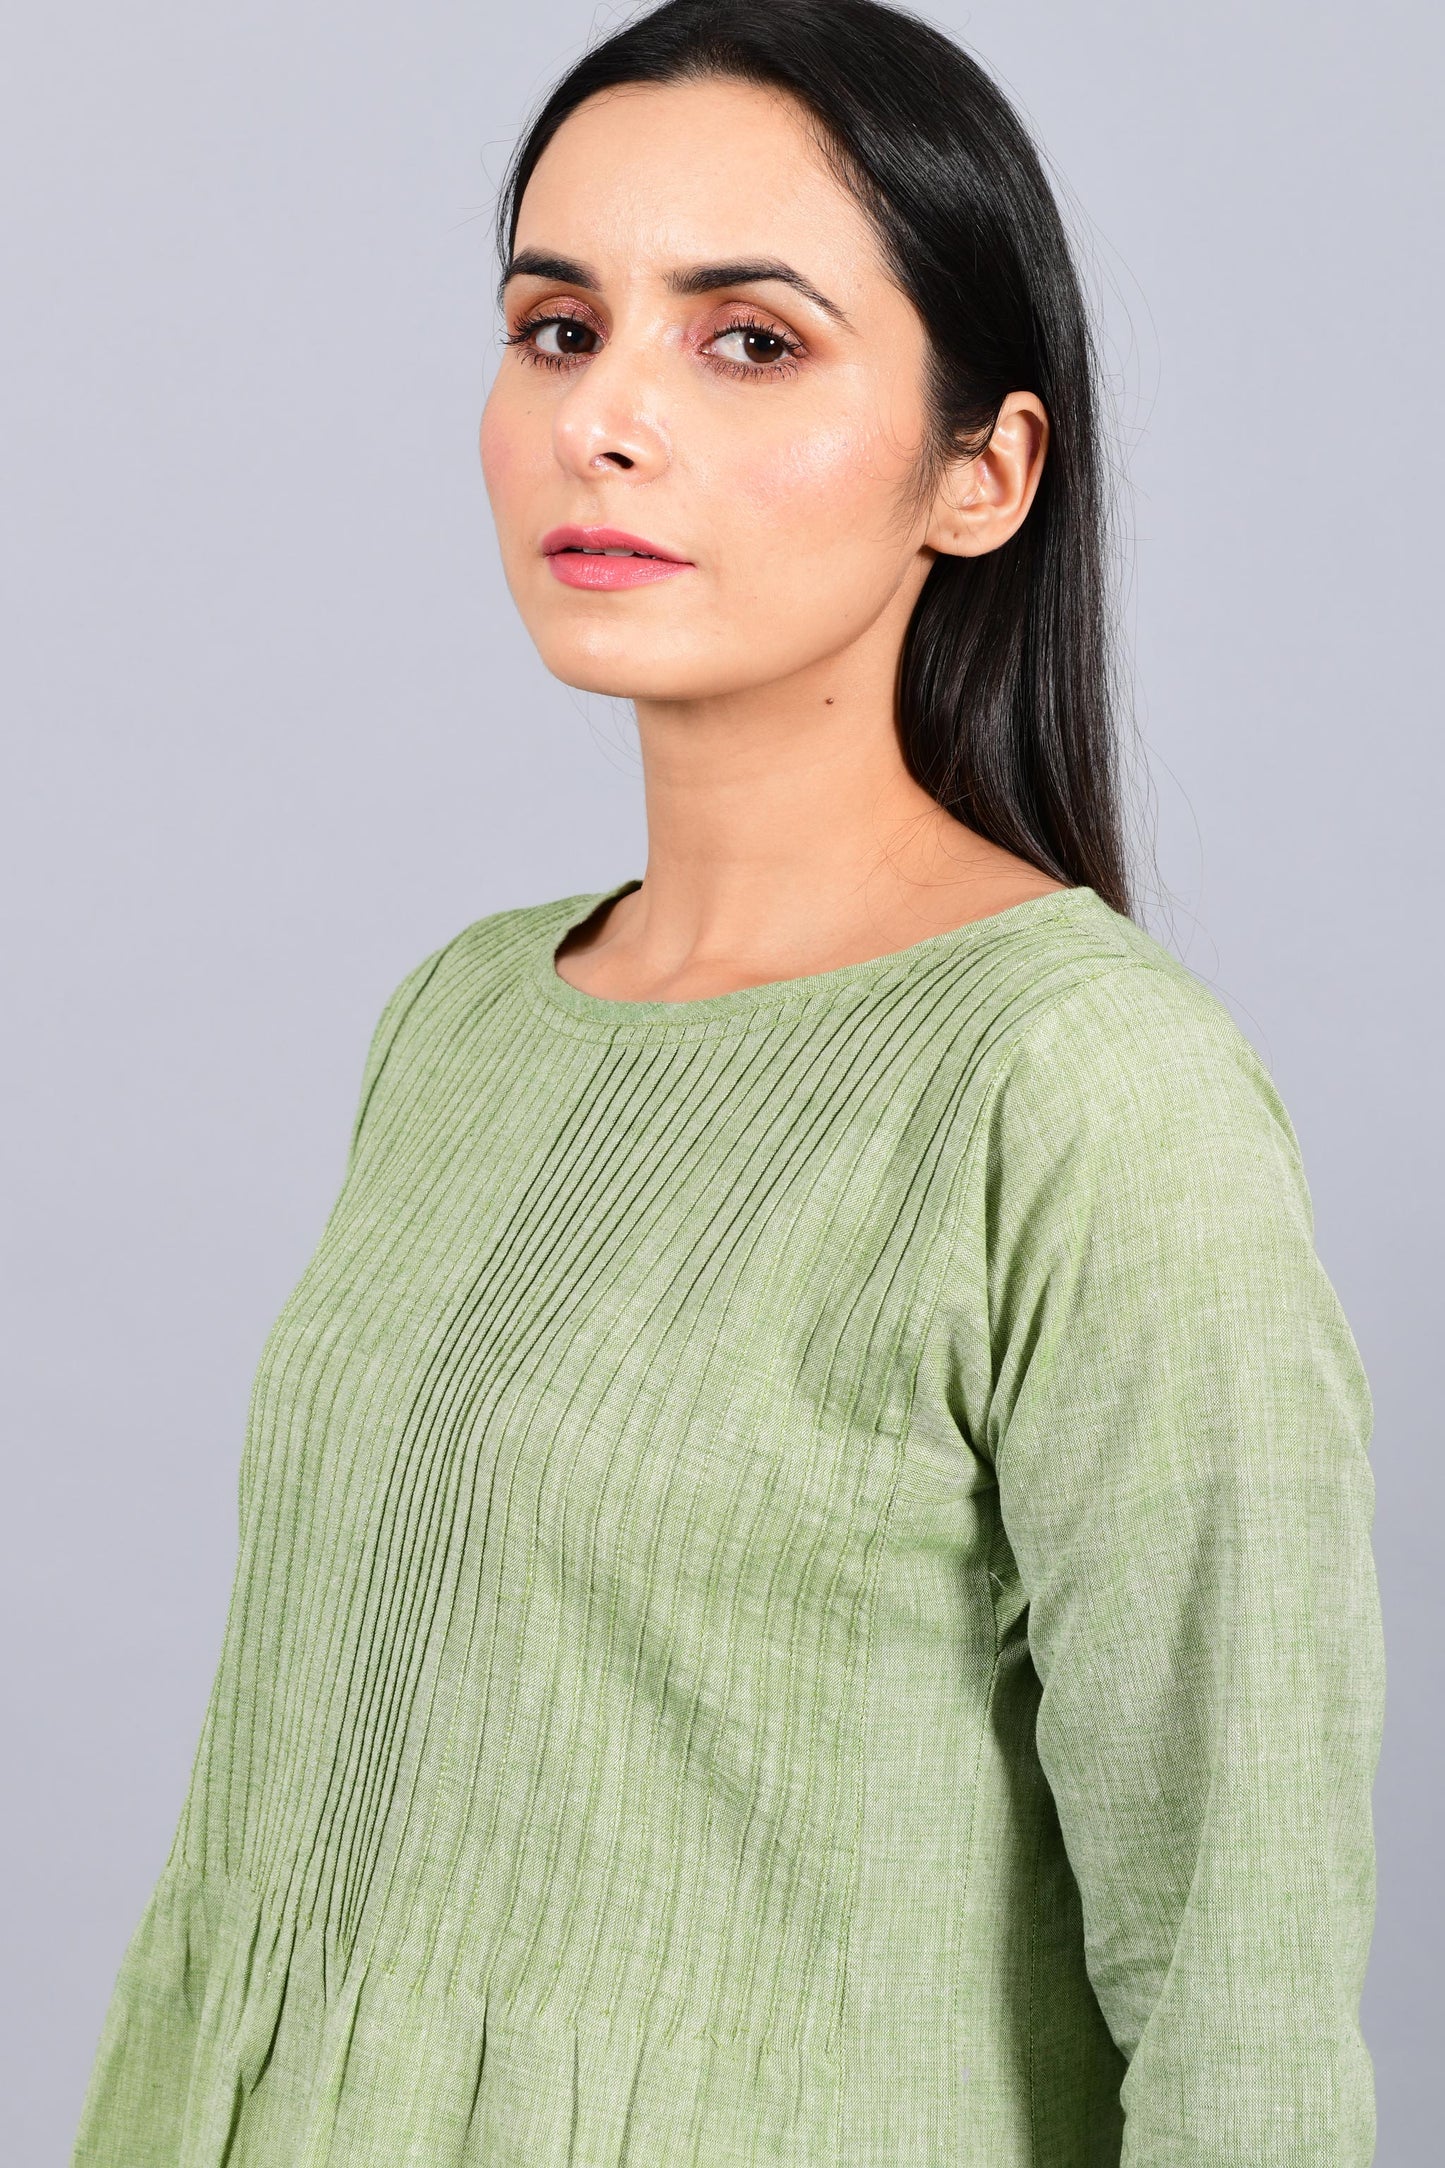 Close up portrait of an Indian female womenswear fashion model in a olive green chambray handspun and handwoven khadi cotton dress-kurta with pintucks on front by Cotton Rack.